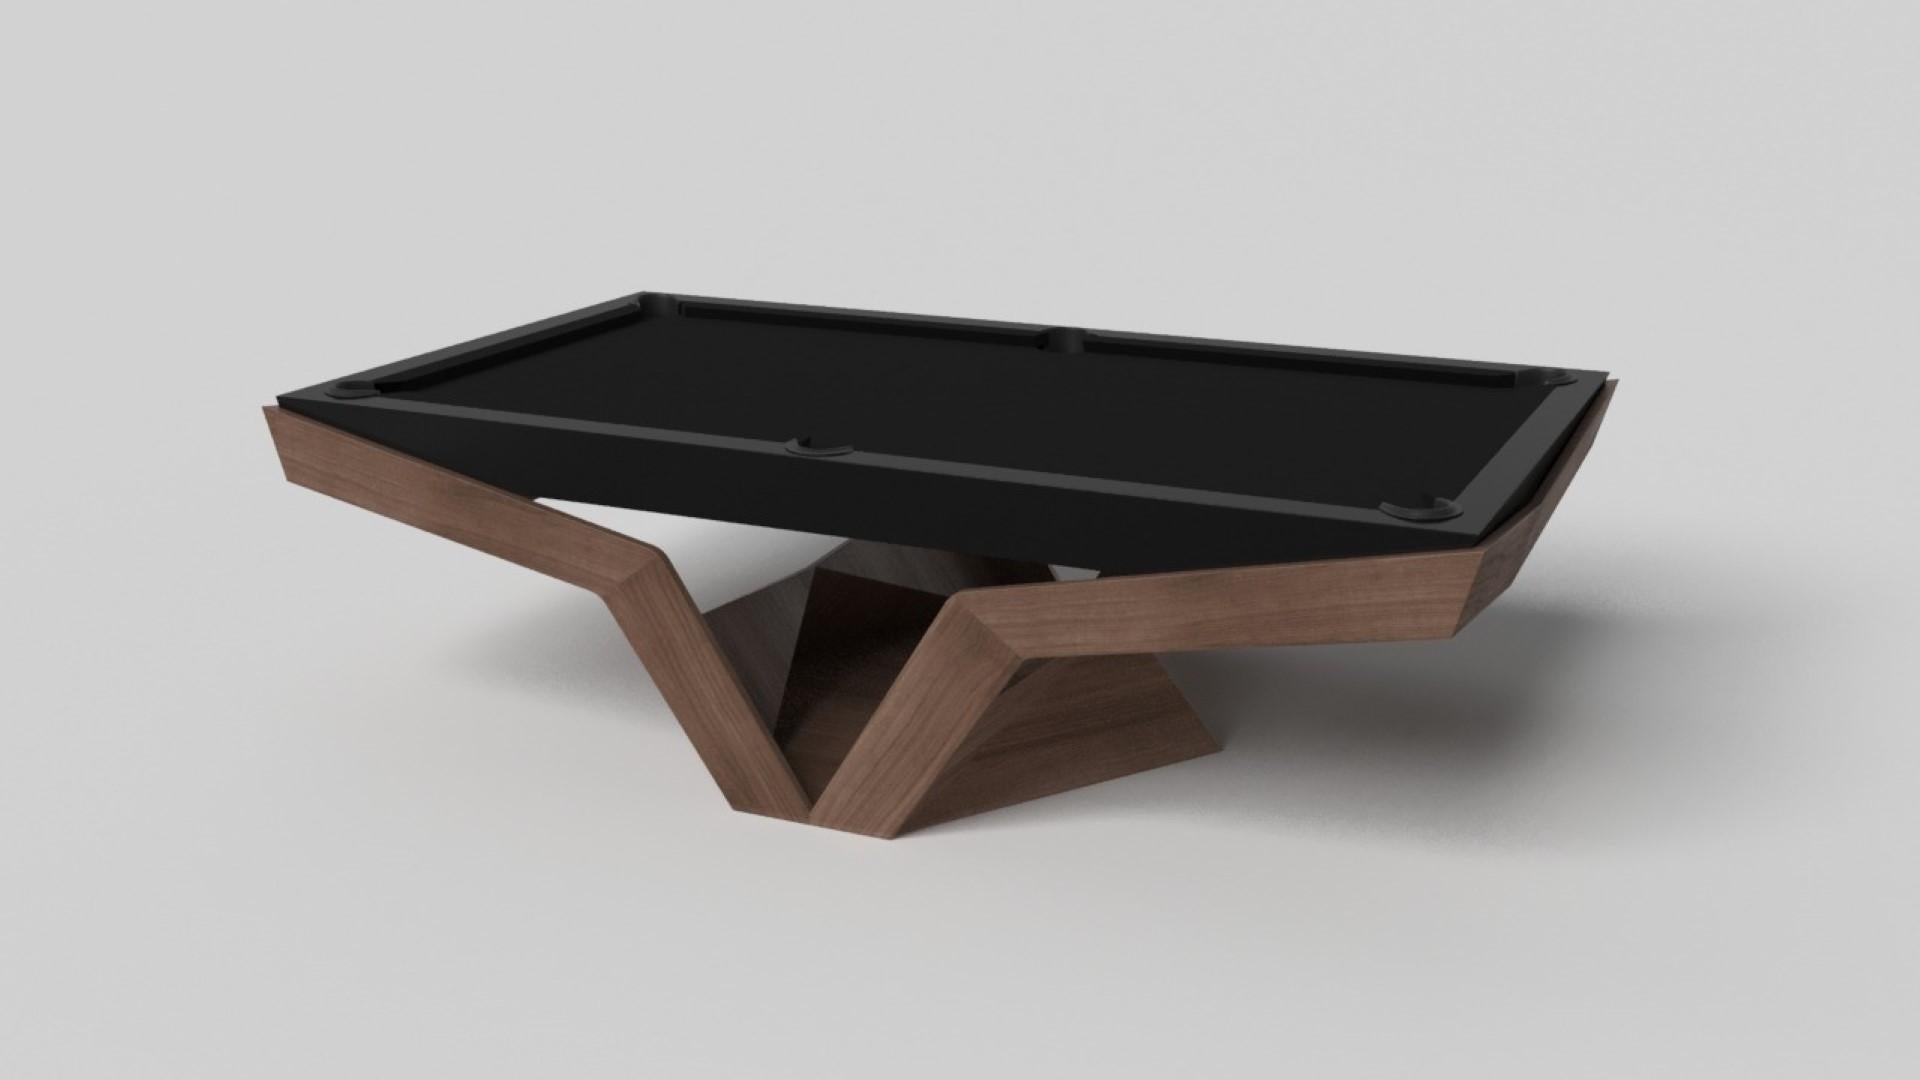 The Enzo pool table is Inspired by the aerodynamic angles of top-of-the-line European vehicles. Designed with sleek, V-shaped lines and a thoughtful use of negative space, this table boasts an energetic sense of spirit while epitomizing the look of